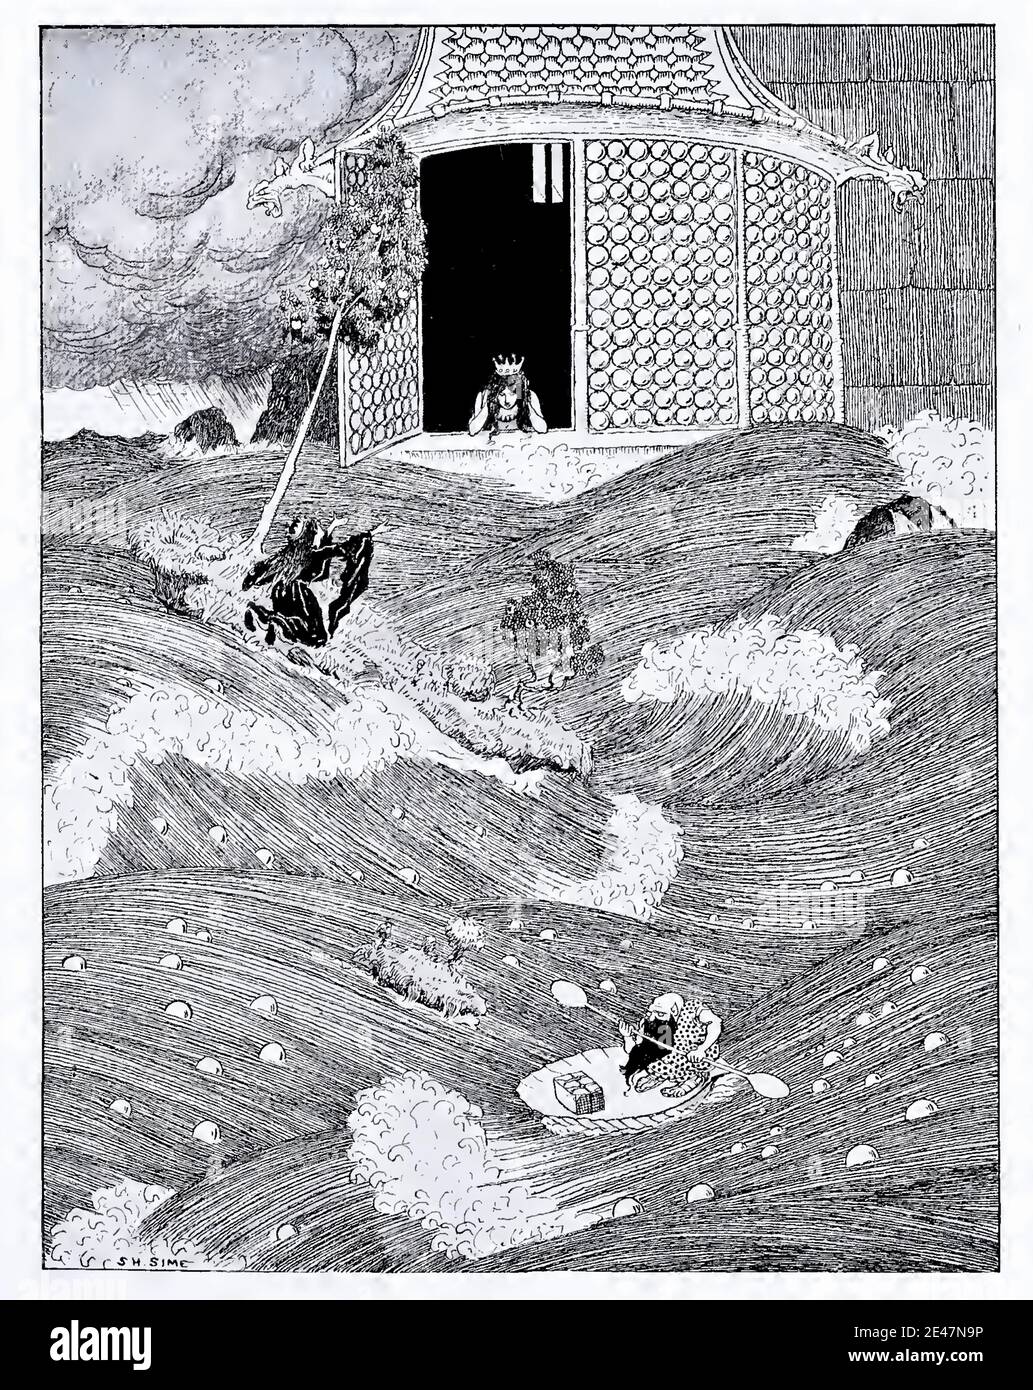 Sidney Sime image entitled In Fairylands Forlorn or The Maelstrom. Storms at sea and challenges ahead. Stock Photo